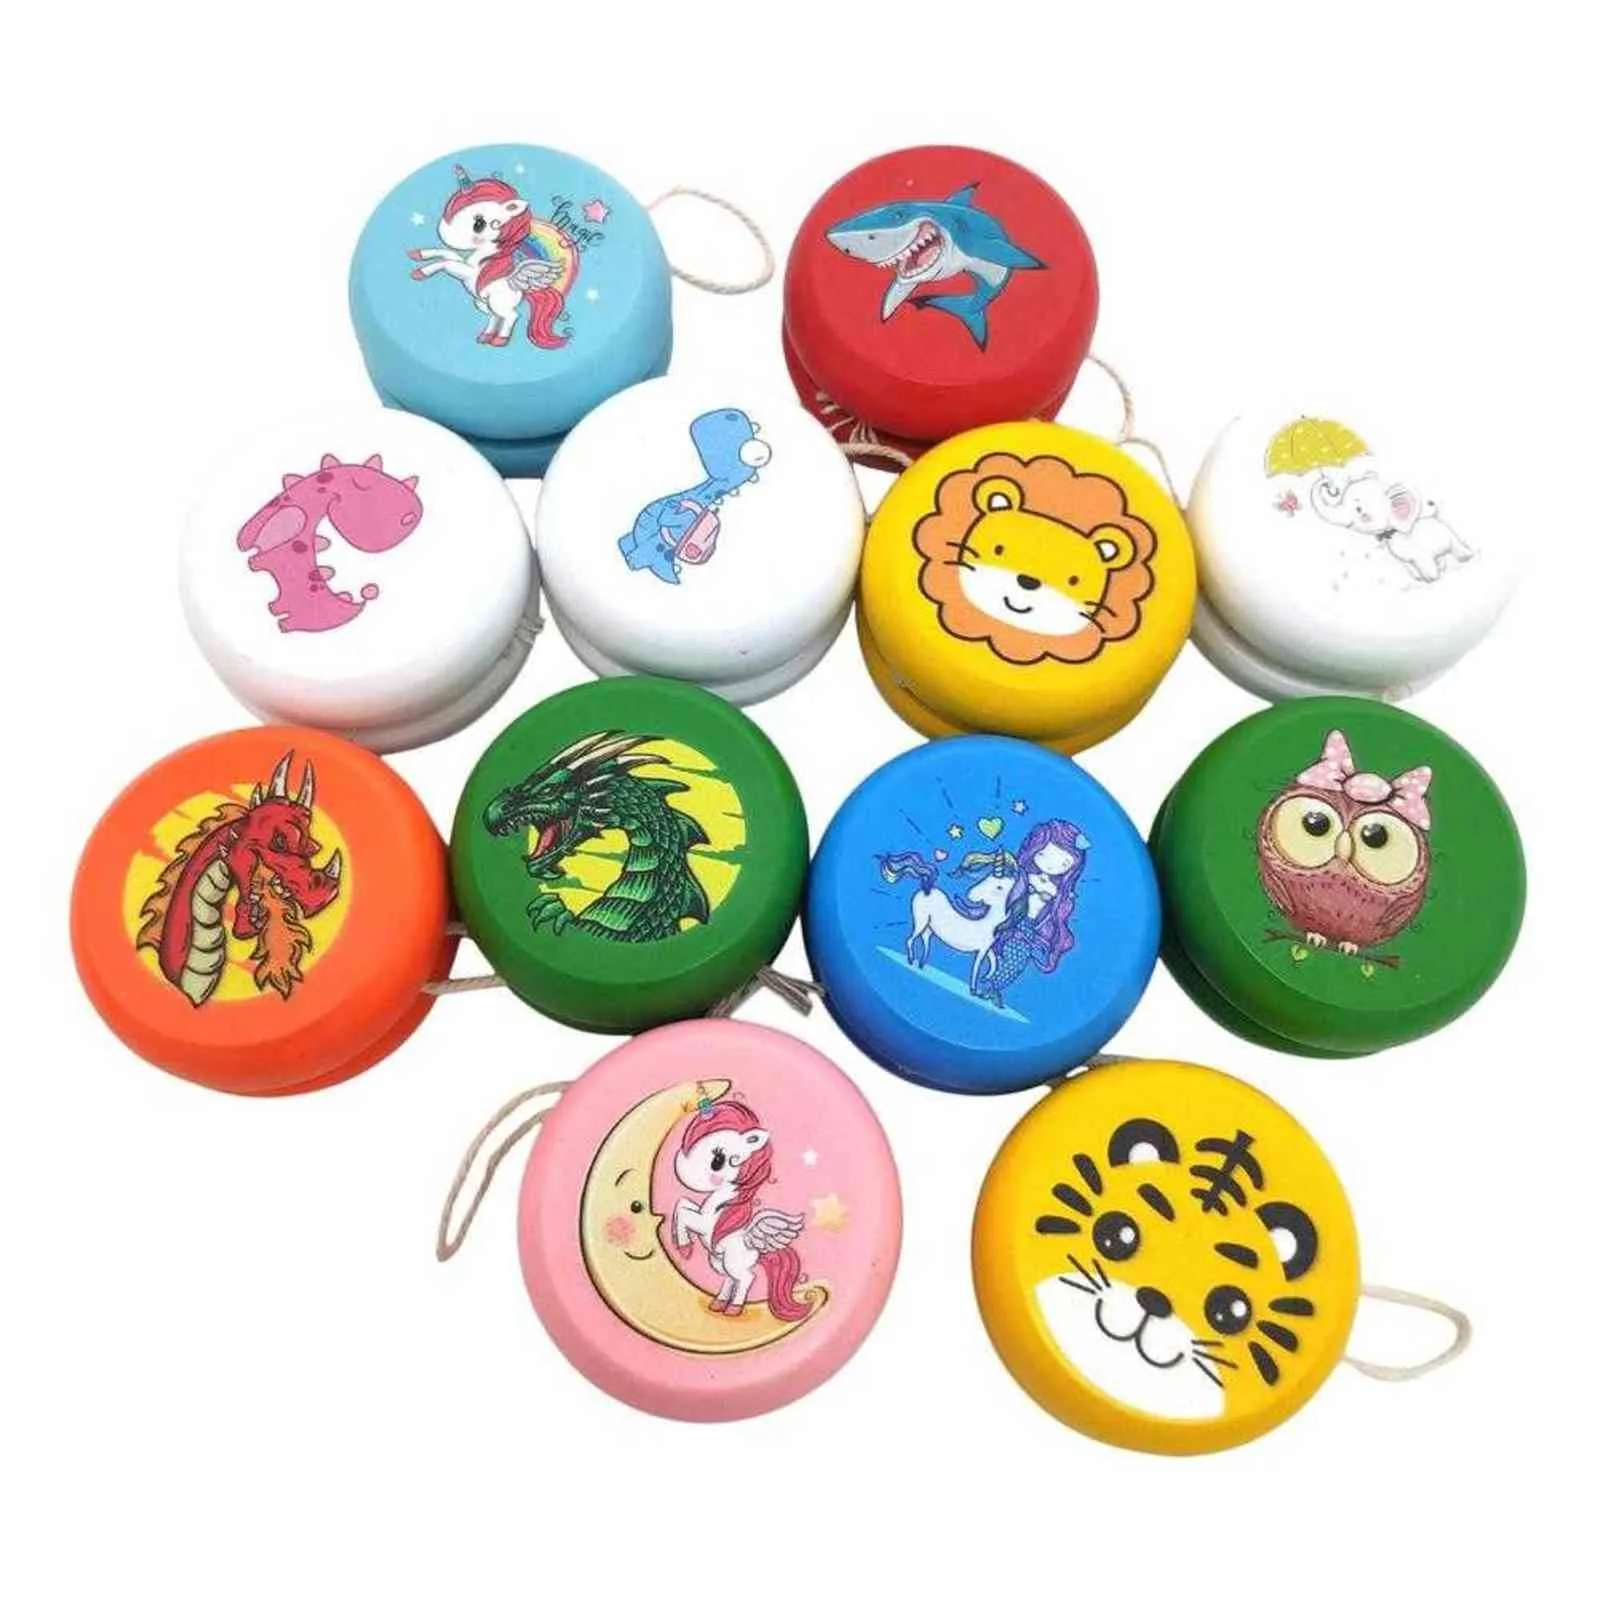 Children's Christmas Toys Personality Innovative Ball Toy Responsive Yoyo Cartoon Yoyo Toys With Lovely Design Suitable For Chri G1125